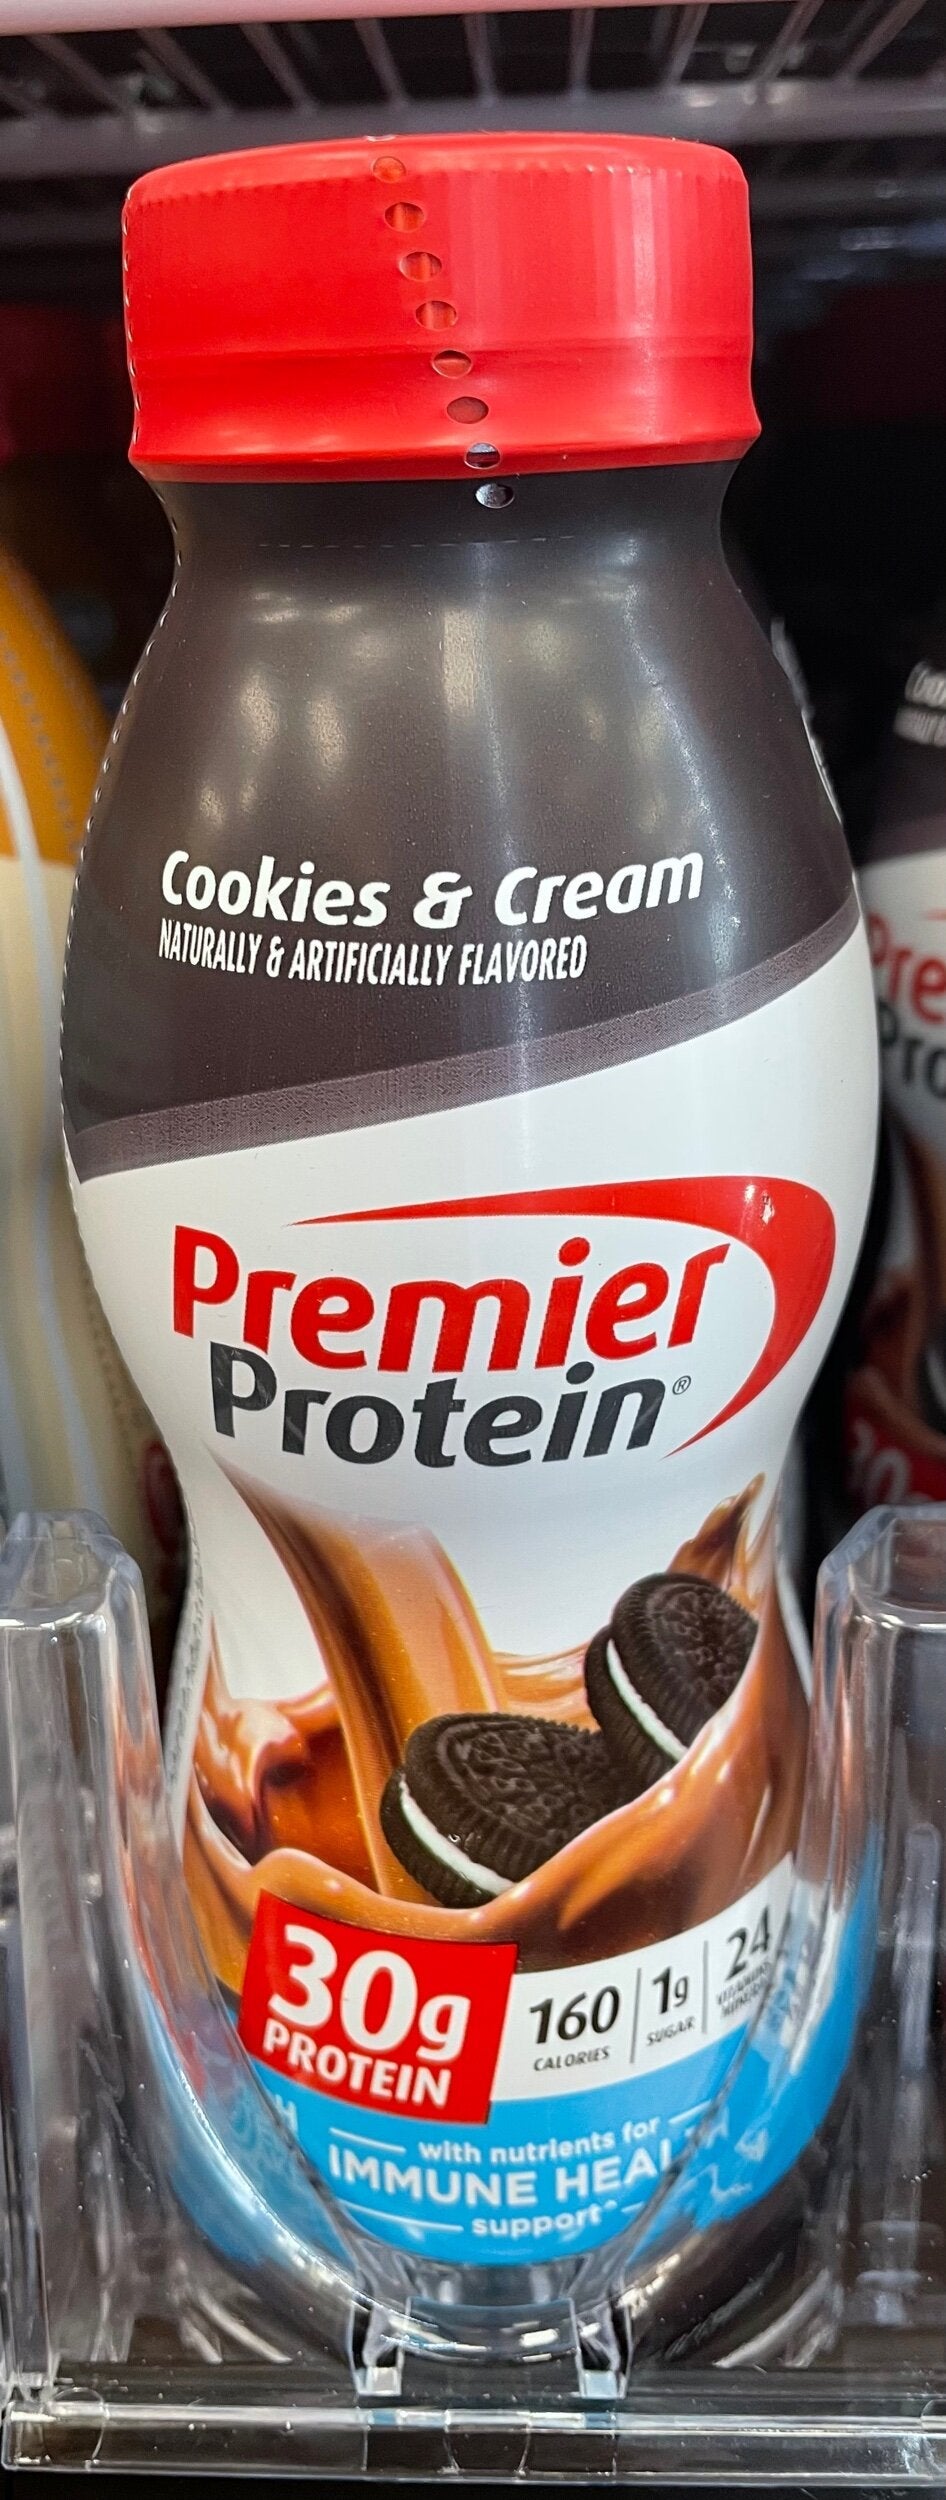 Premier Protein Drink - Krazy Muscle Nutrition Not specifiedSQ2881312